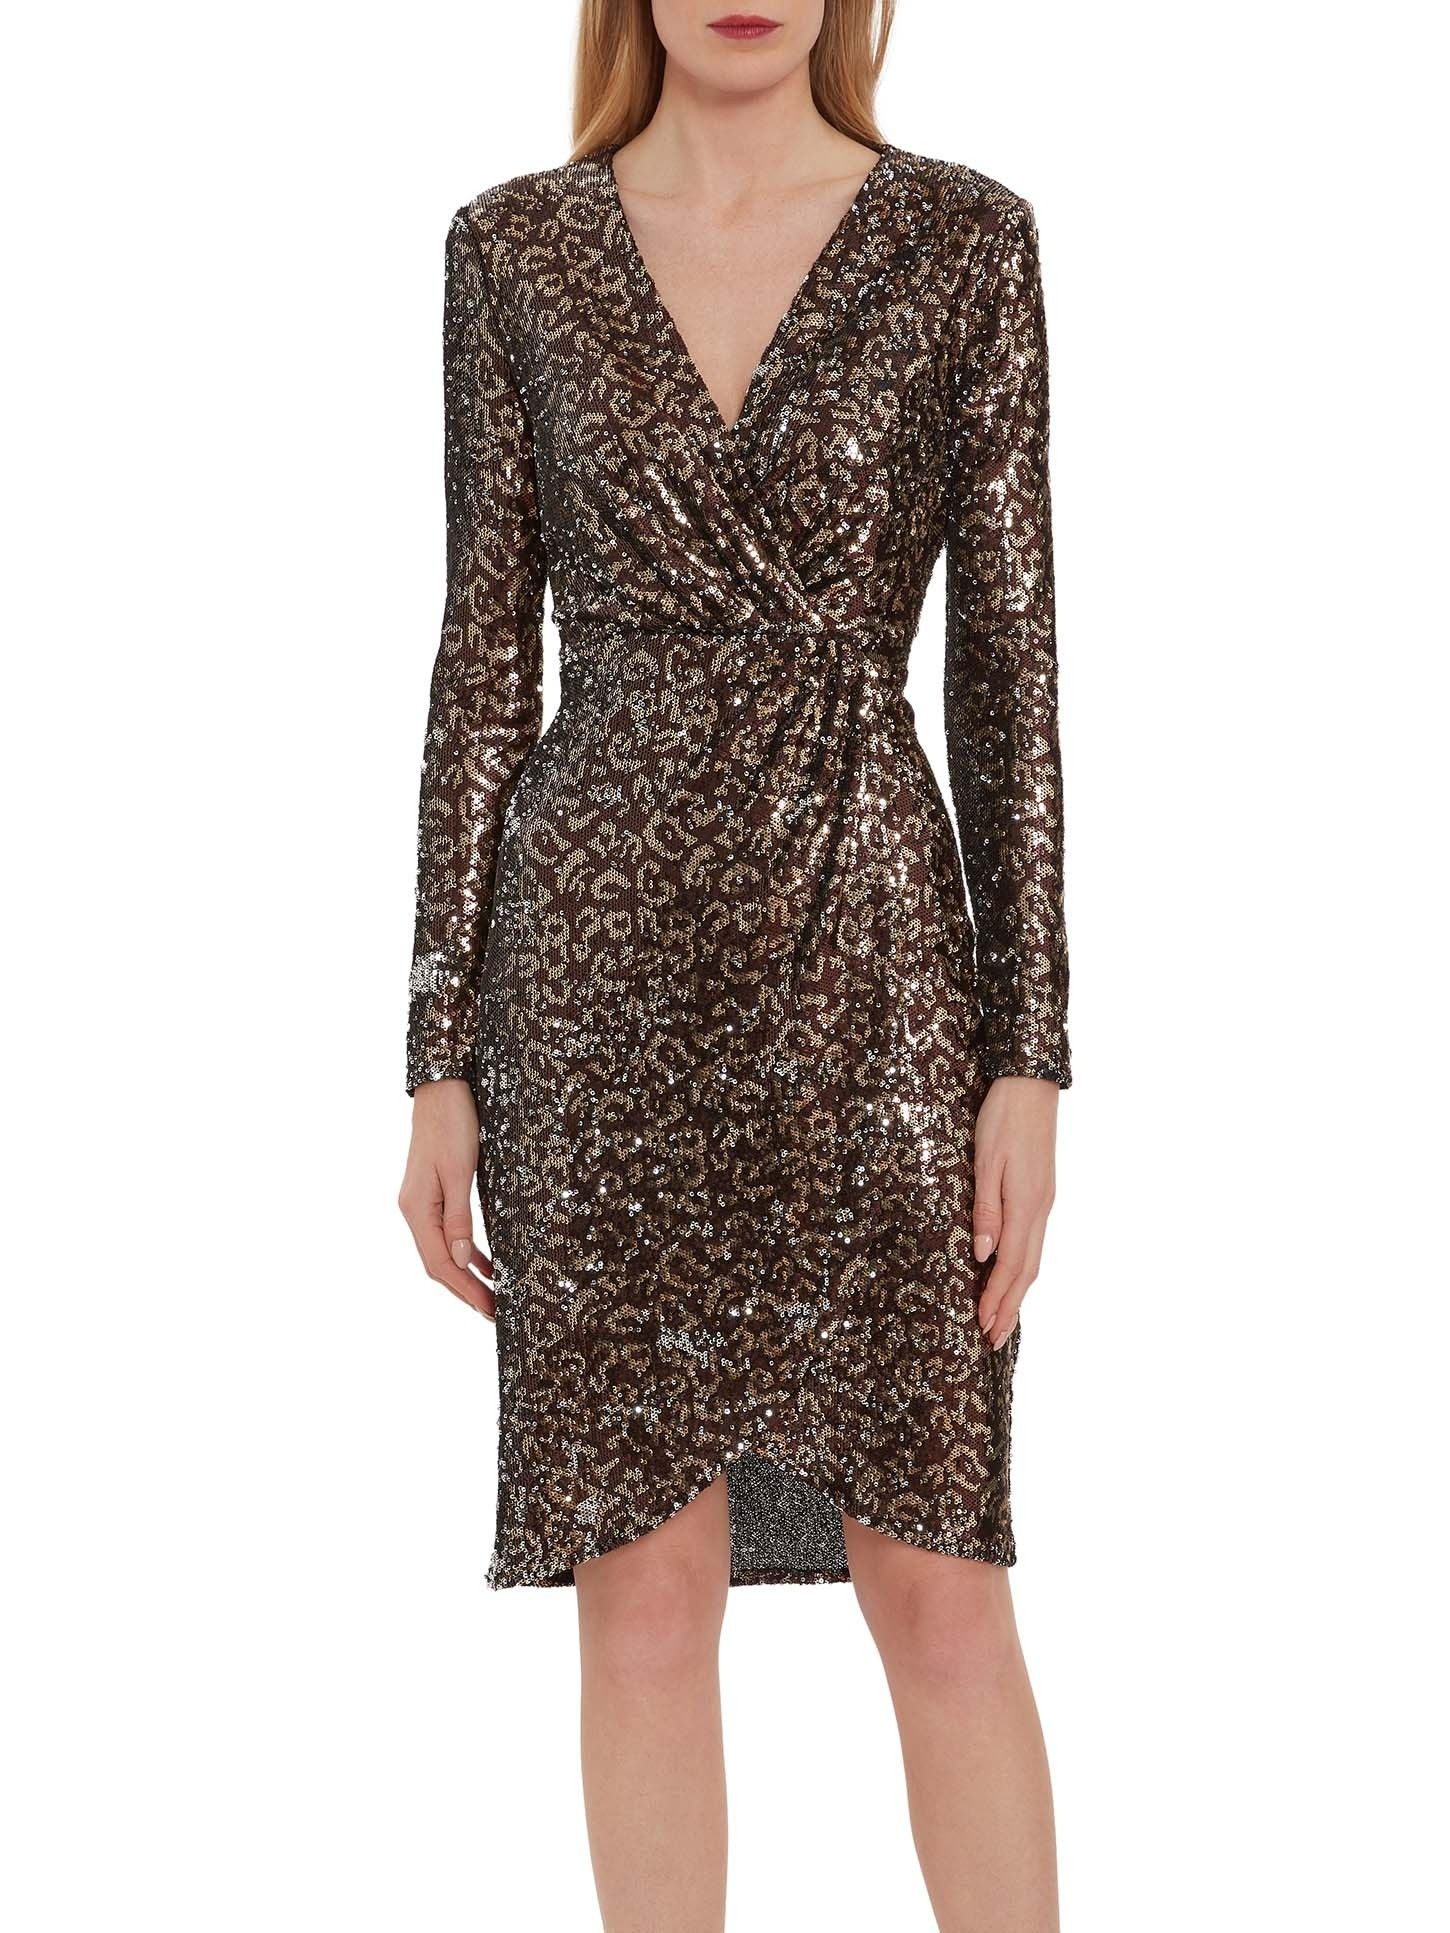 This gorgeous wrap dress by Gina Bacconi is sure to make you stand out. This low cut sequin dress is perfect for a party or special occasion. With ruching and a split hem for a classic look.